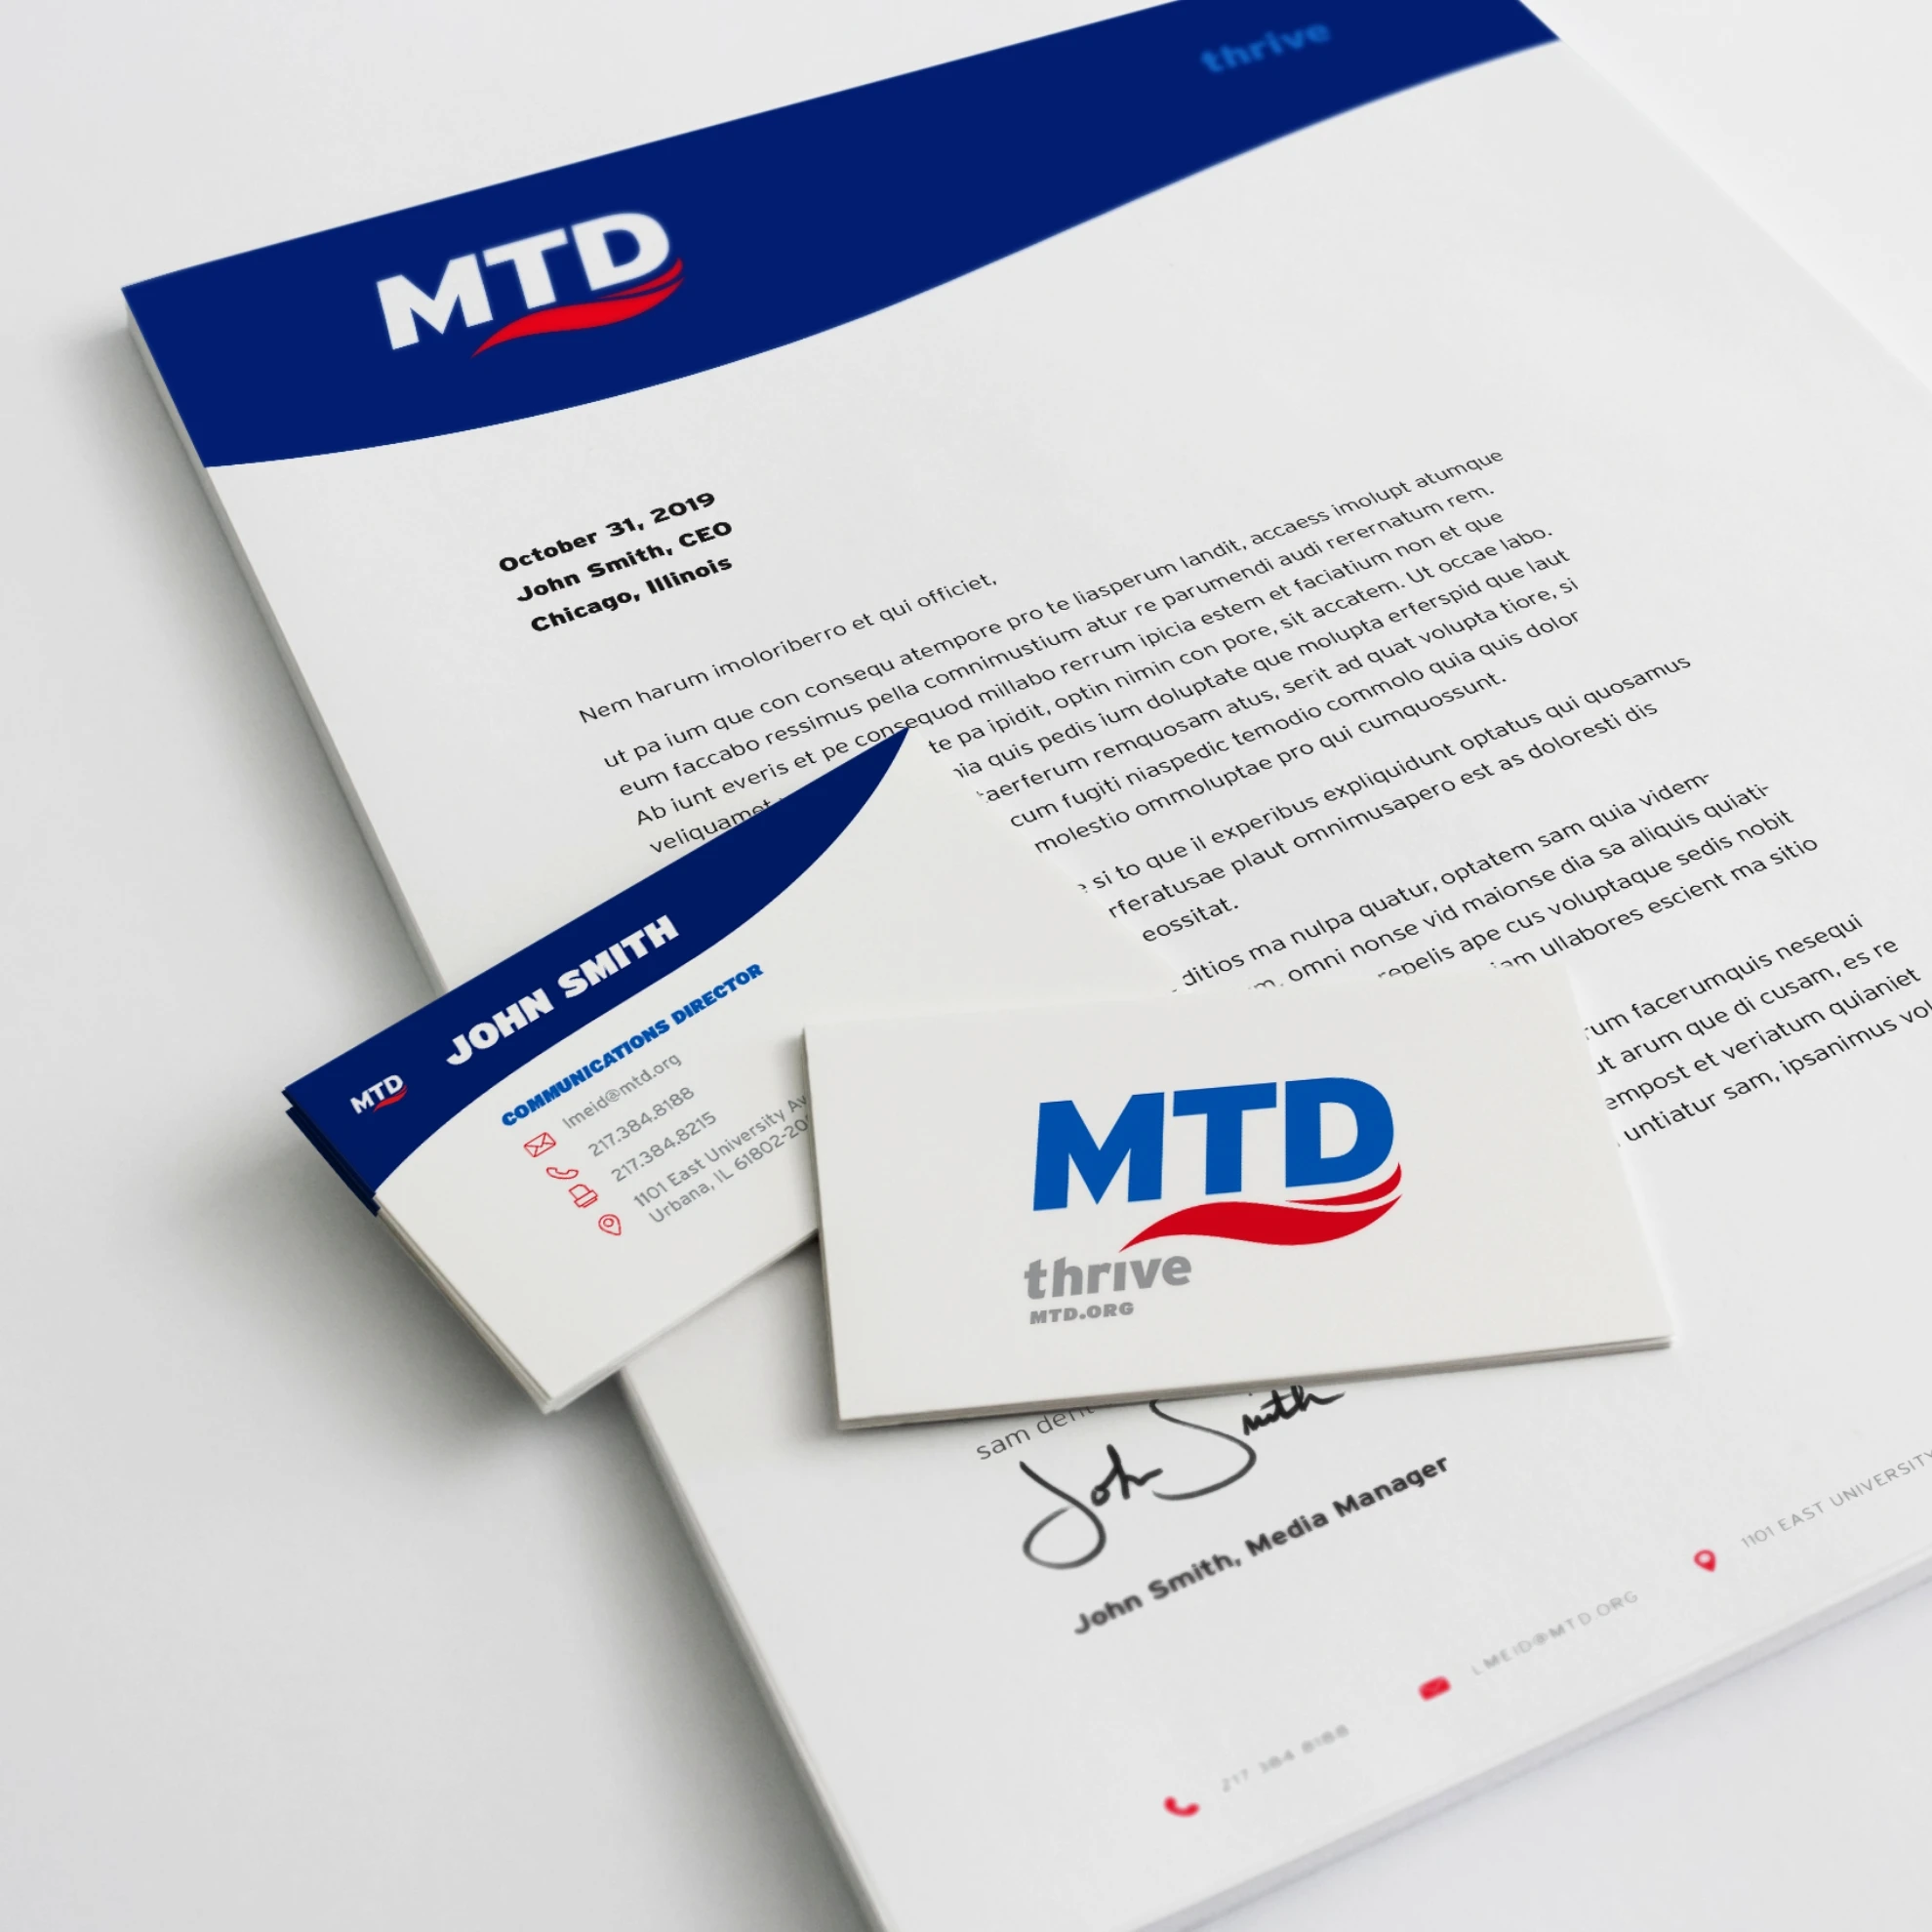 A business card and letterhead for mtd.